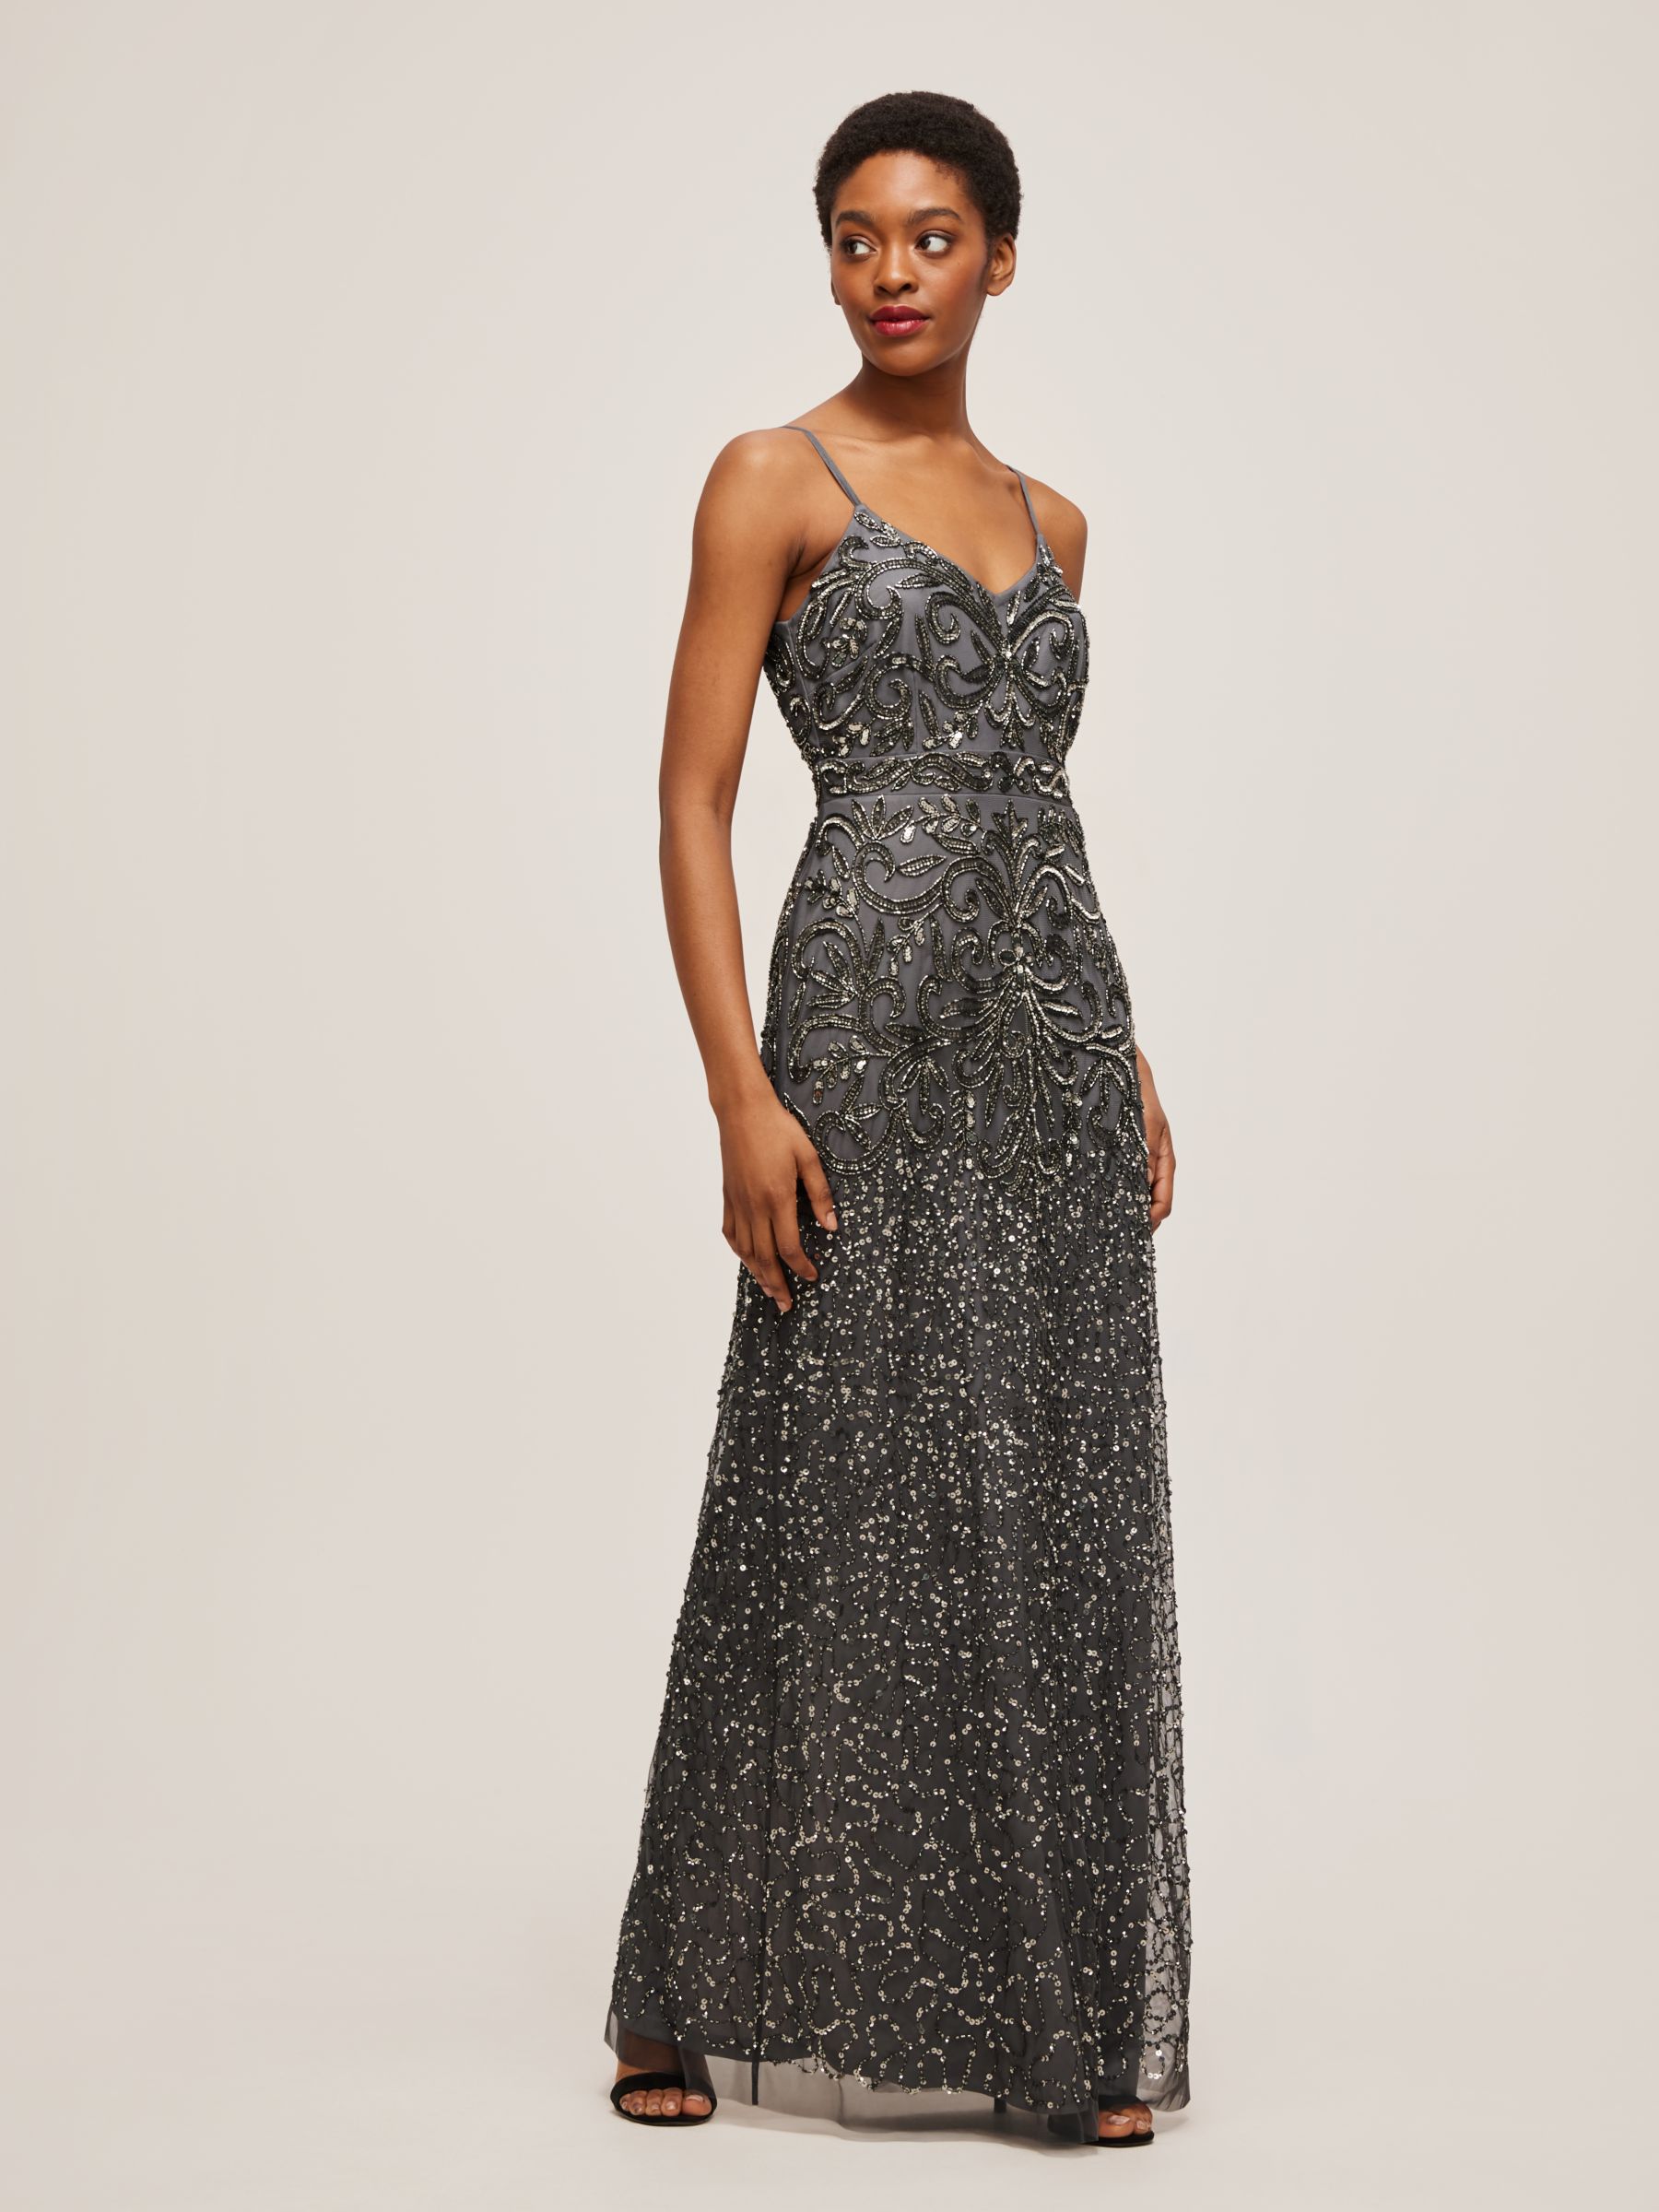 Lace & Beads Fiona Sequin Embellished Maxi Dress, Charcoal, 8